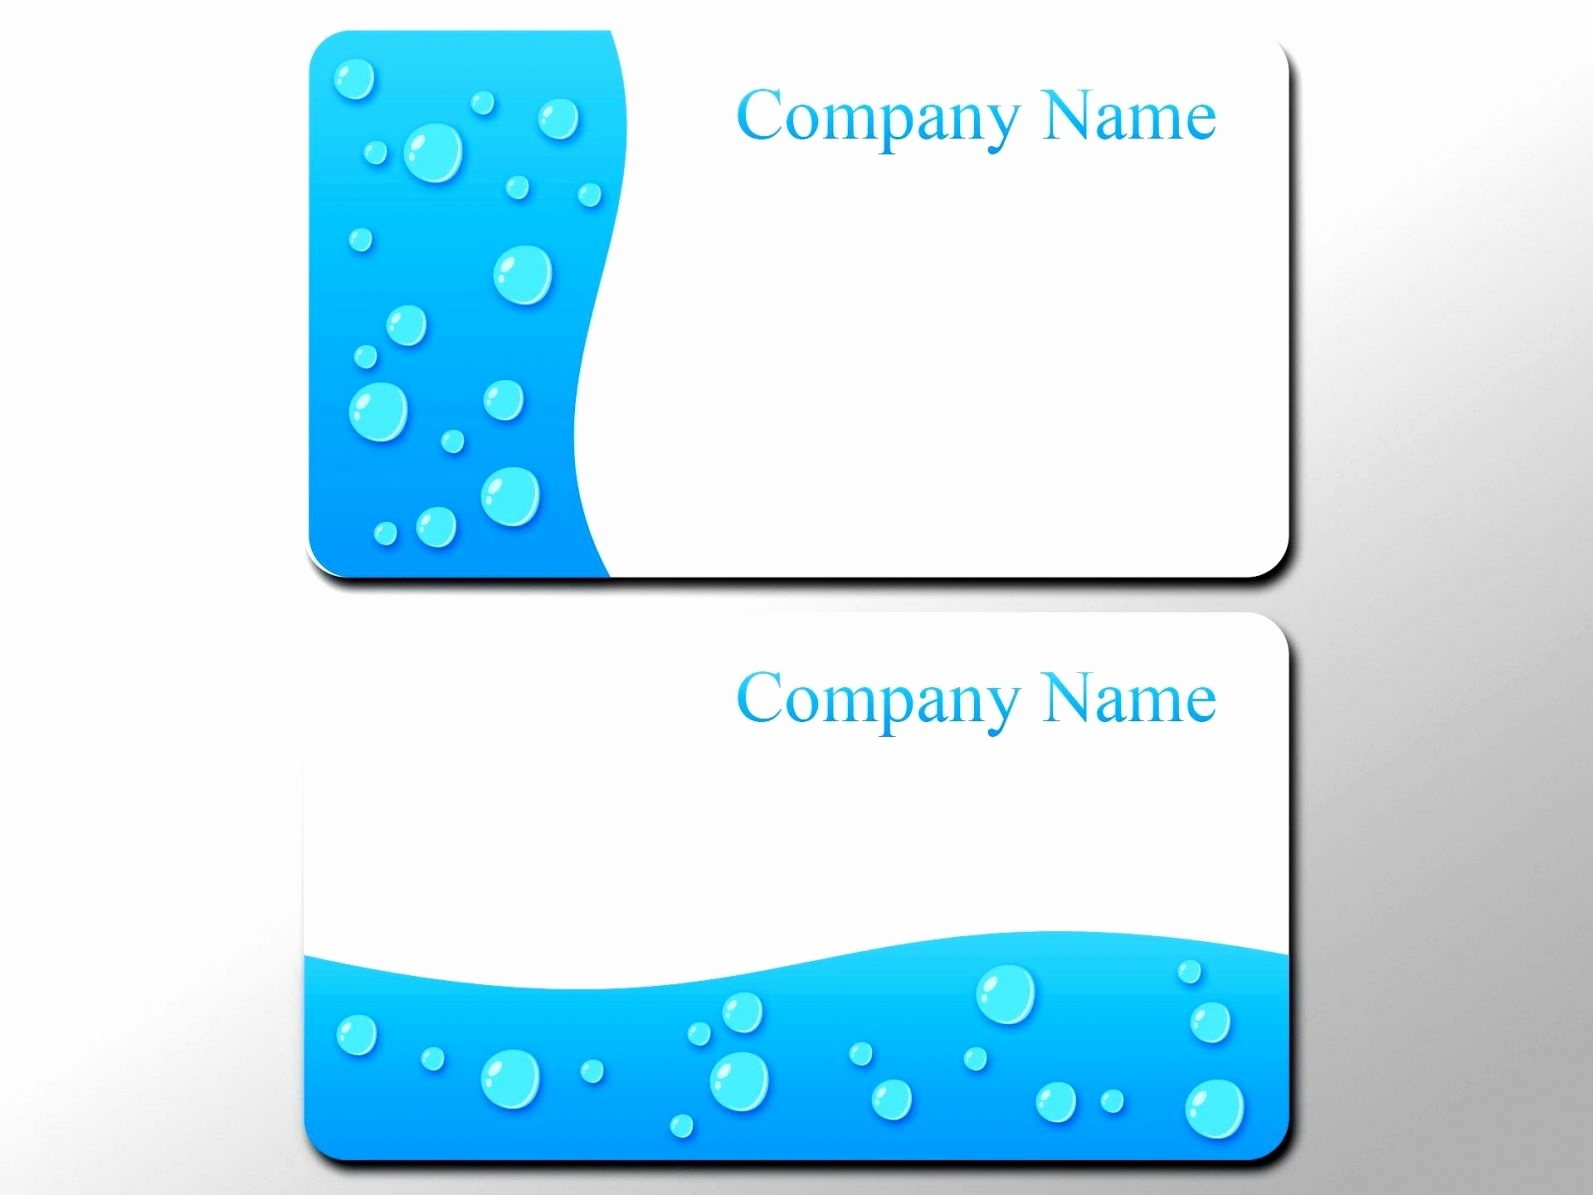 Business Card Format Photoshop Template Cc Beautiful For In Business Card Template Size Photoshop